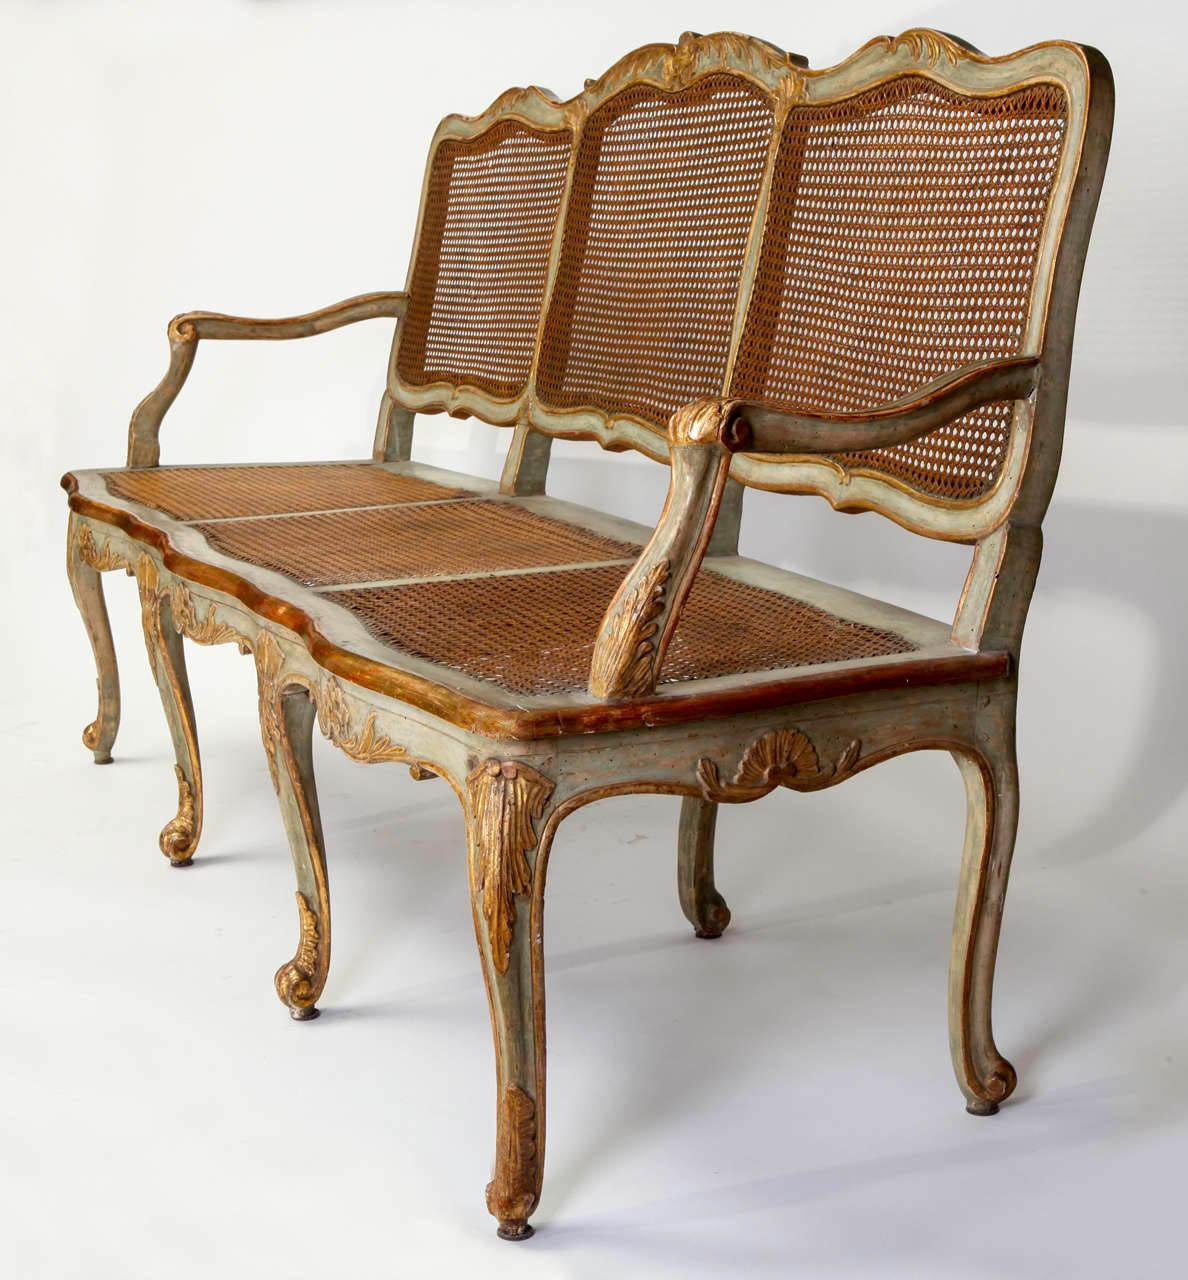 Baroque Italian Parcel-Gilt and Painted Canape or Sofa, 18th Century For Sale